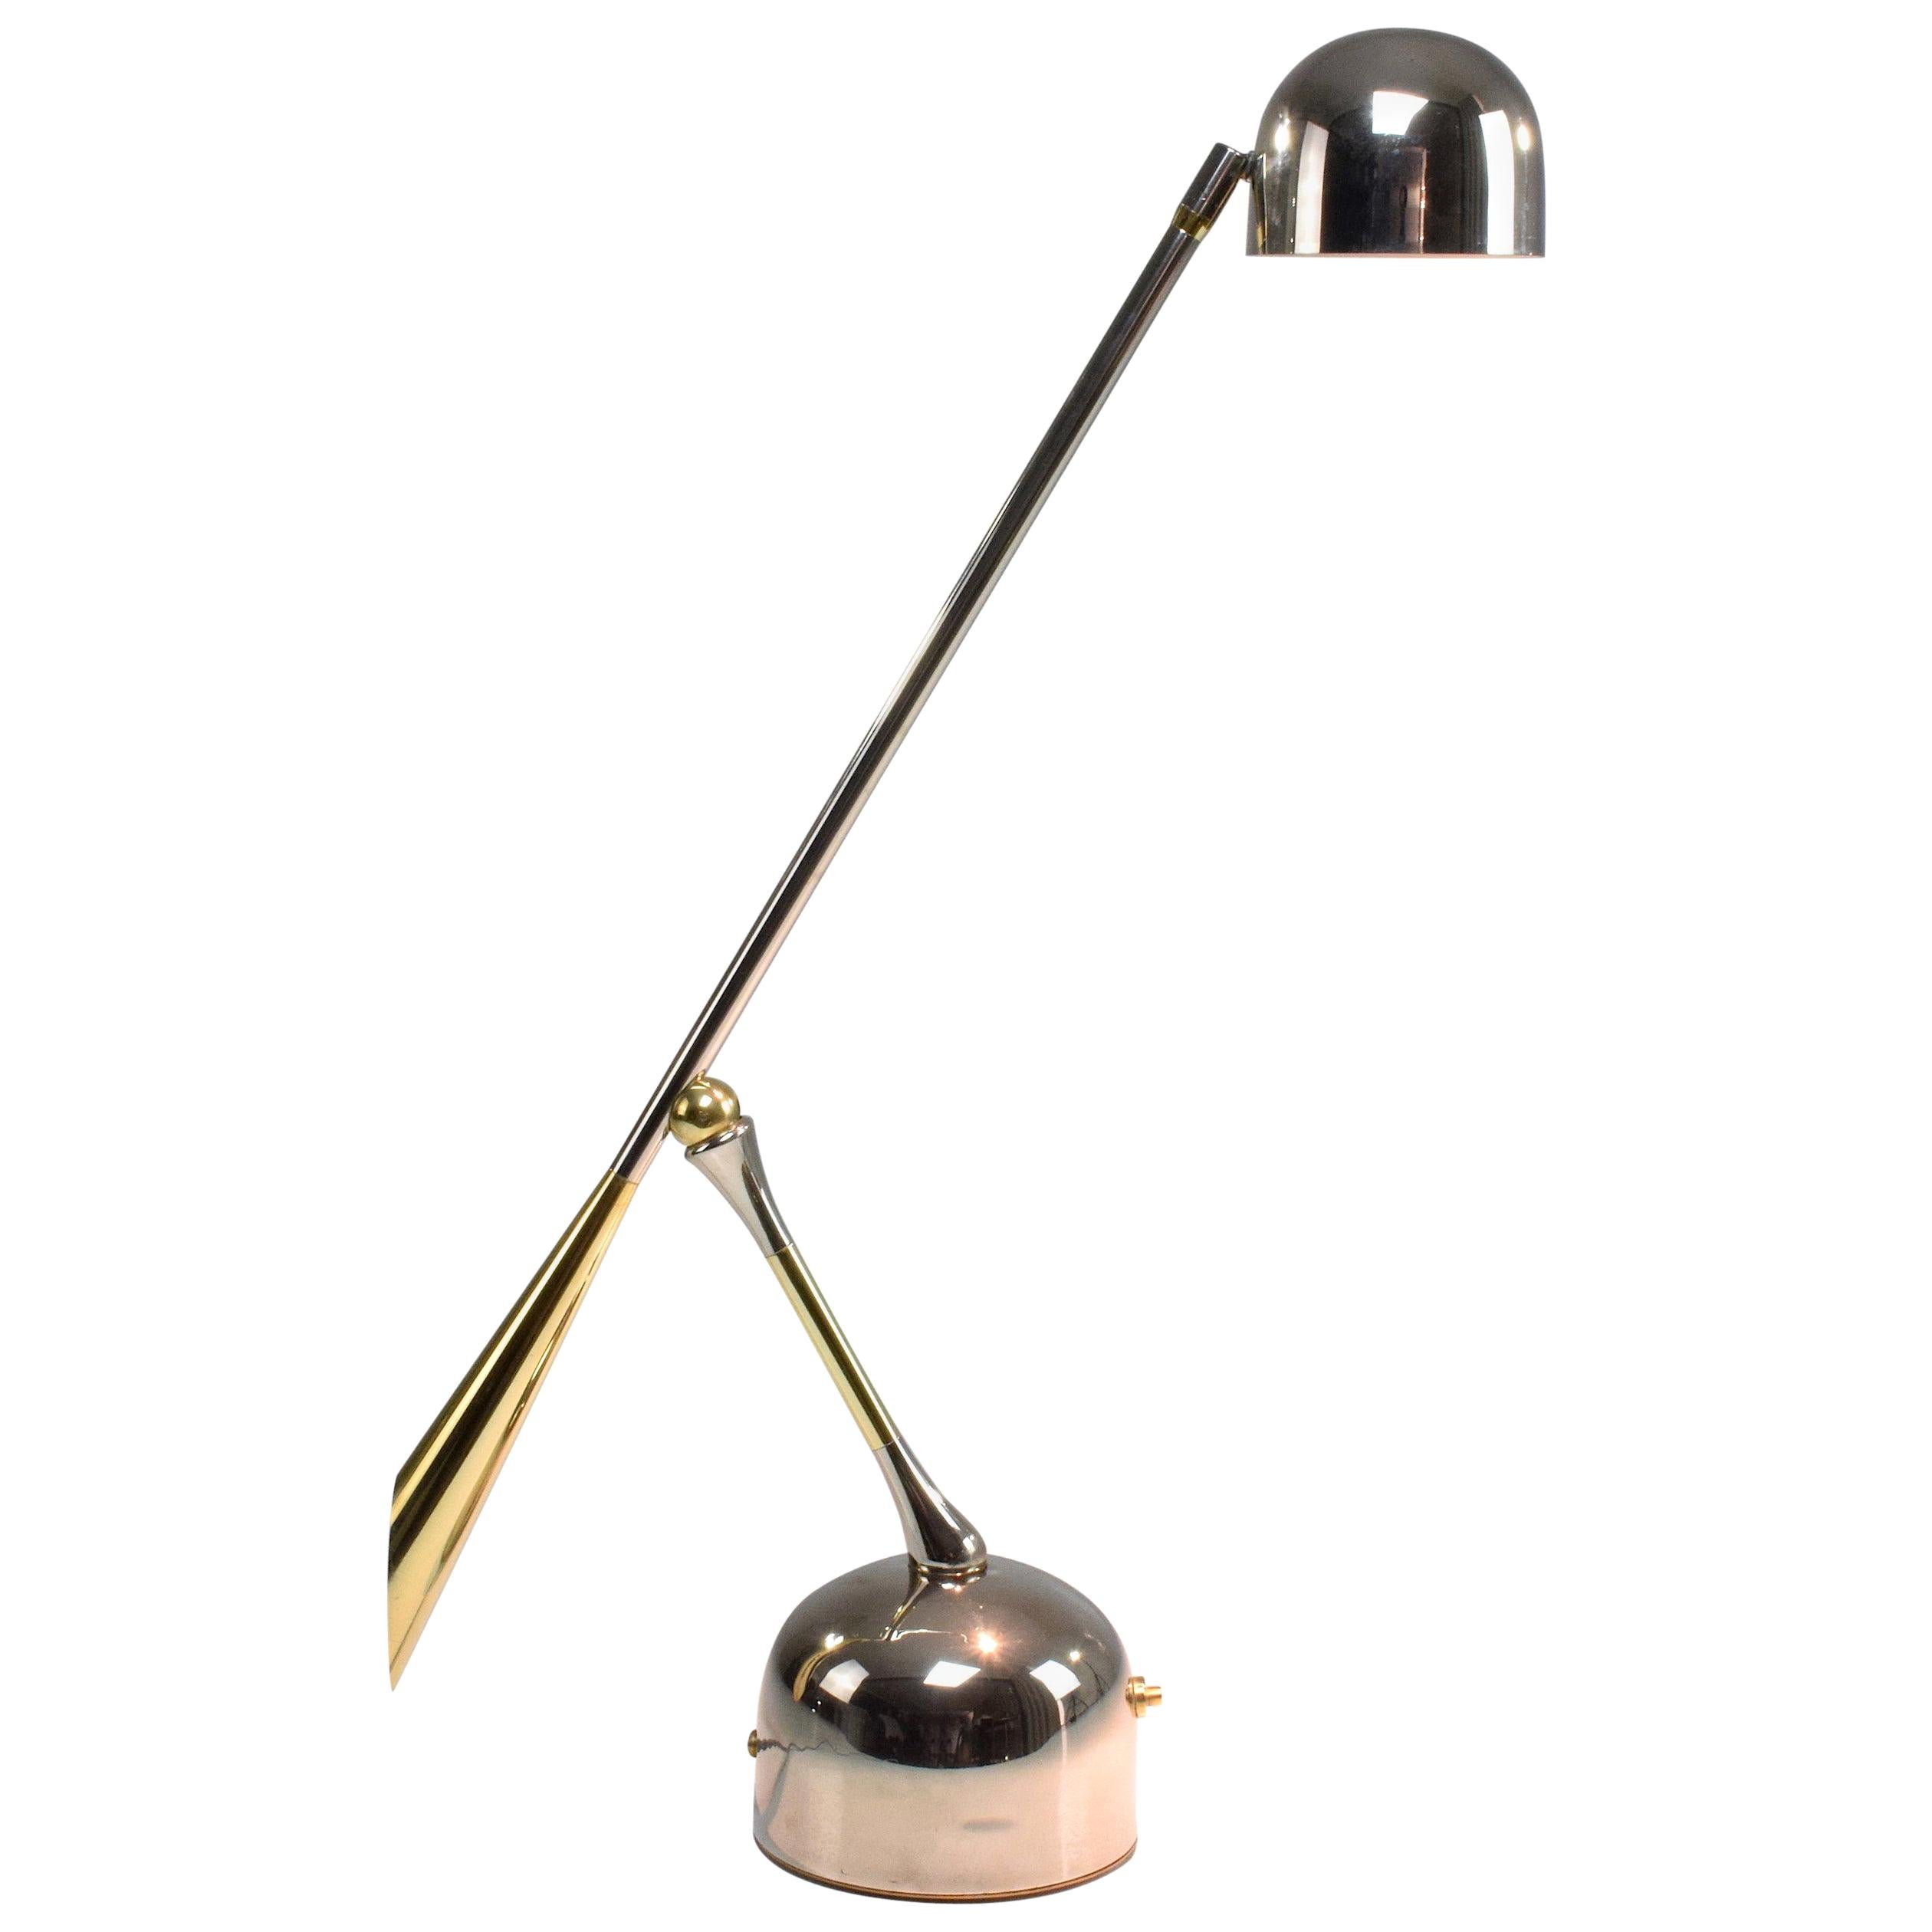 Continuum-II Contemporary Brass Double Articulating Lamp